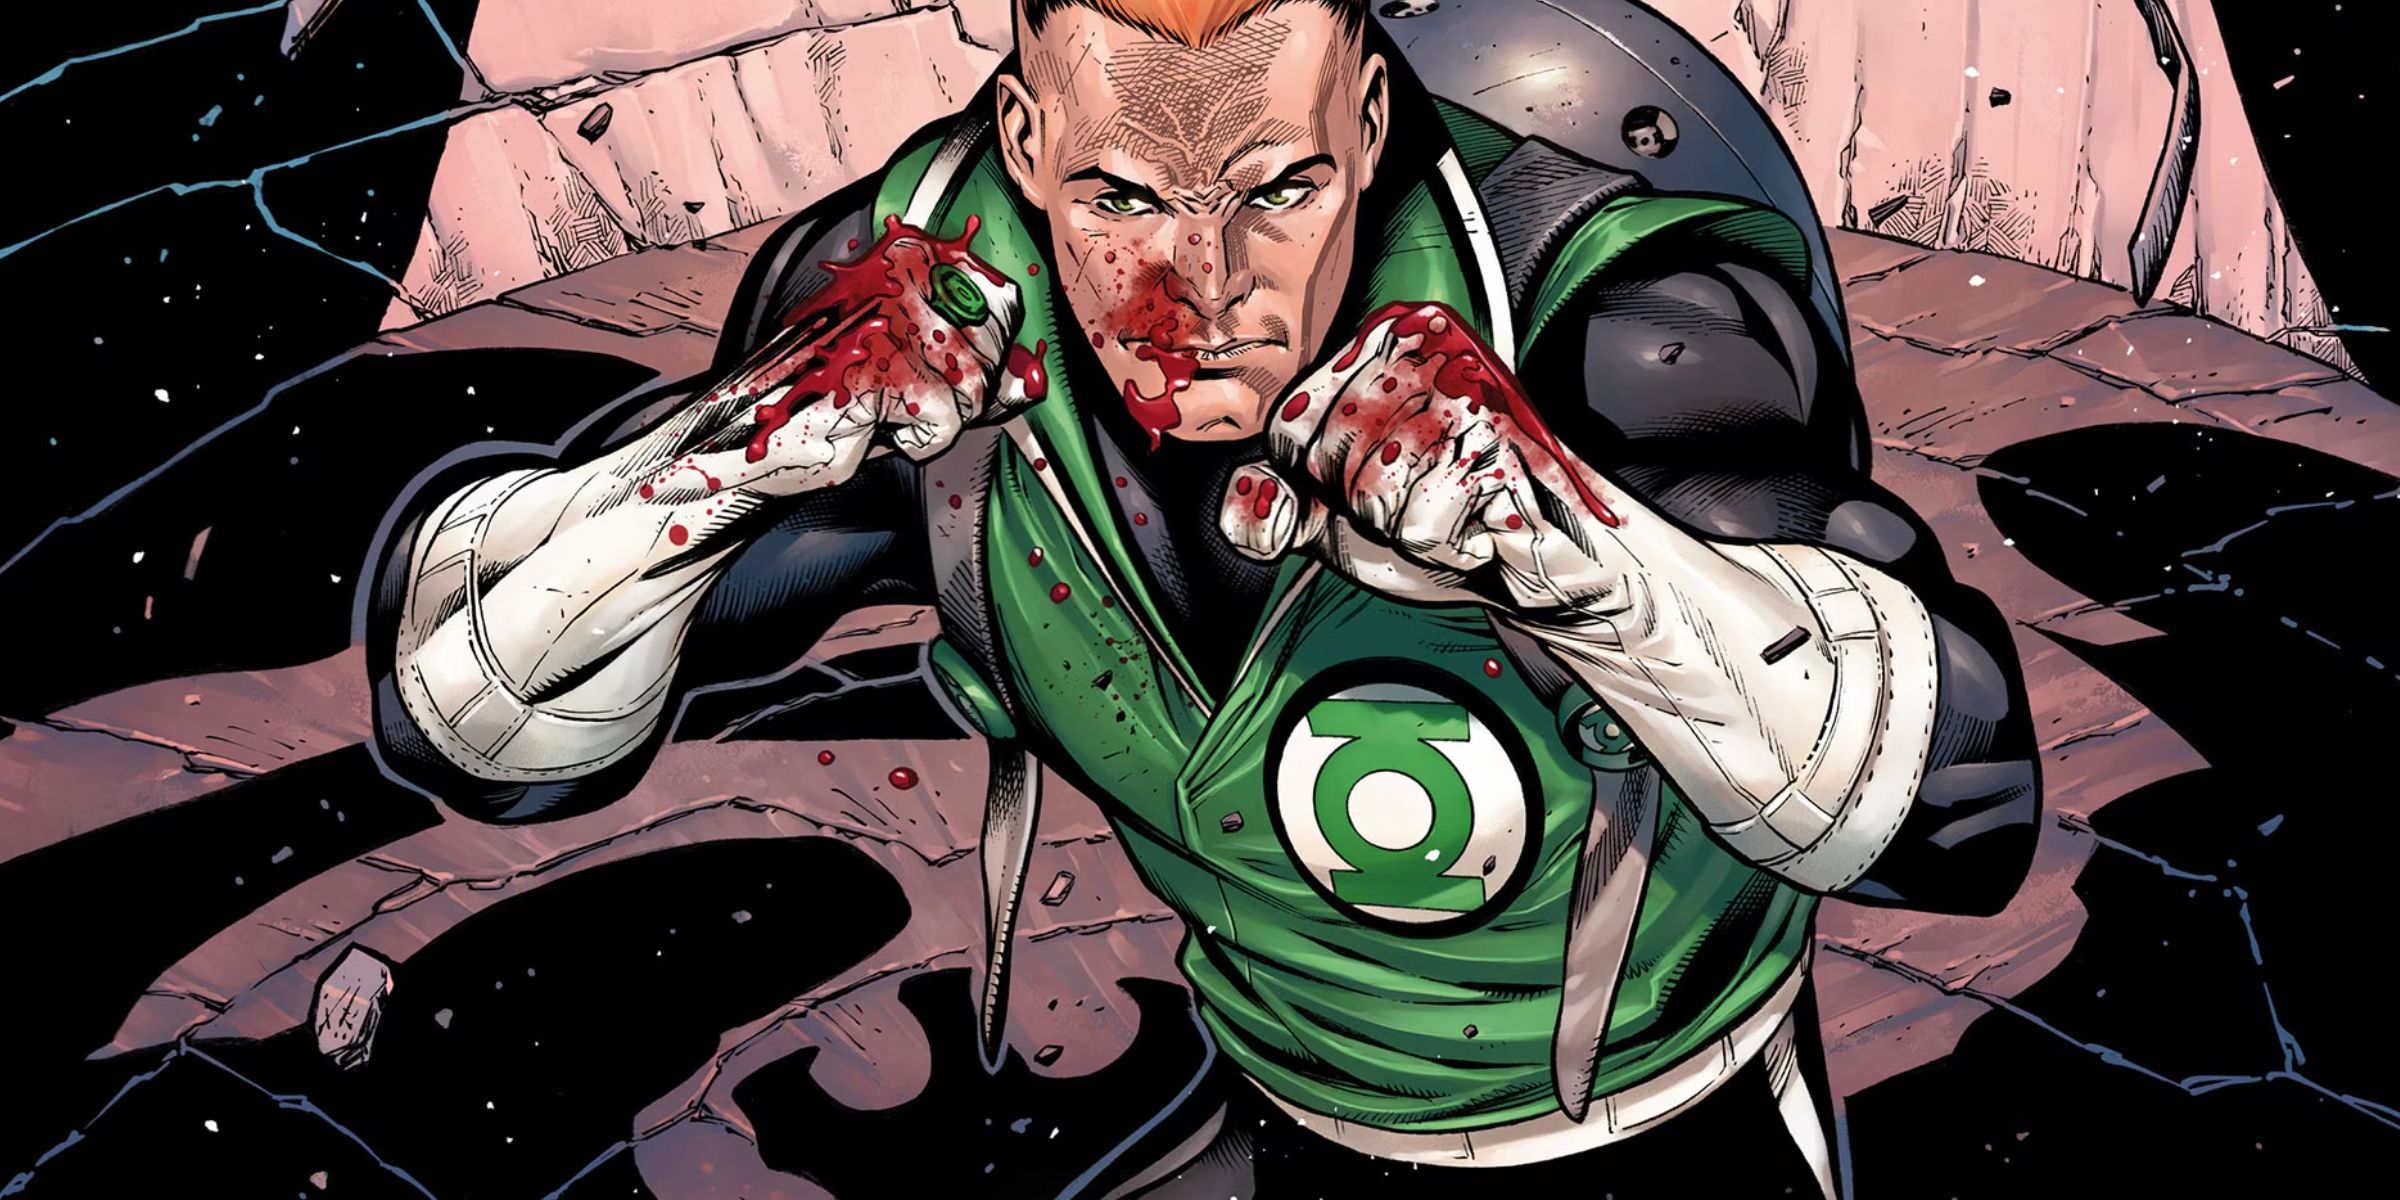 Guy Gardner with bloodied fists in DC Comics